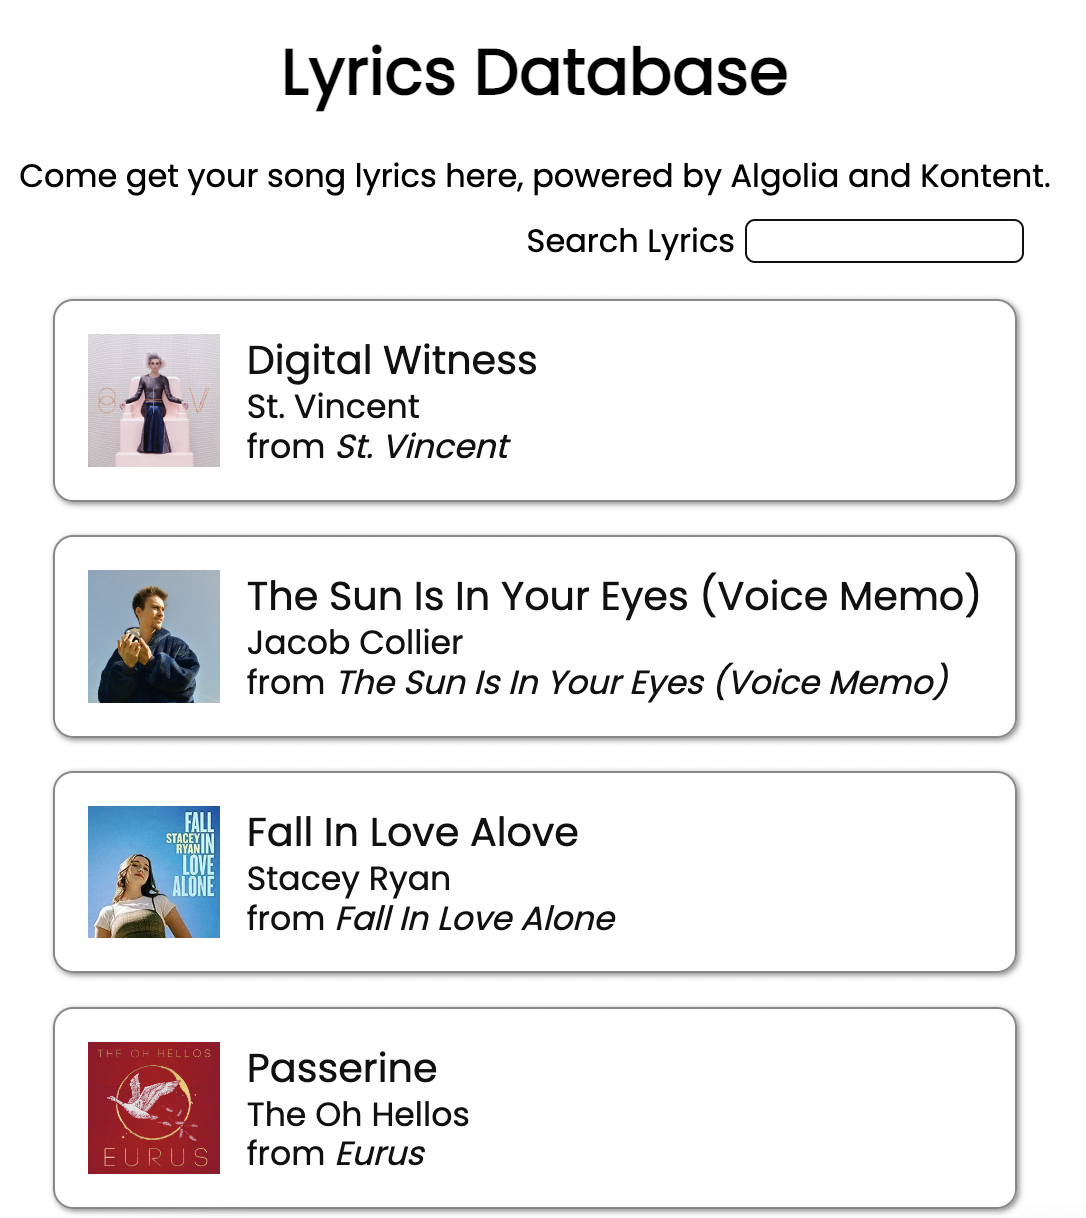 8The new lyrics homepage with the search box and results